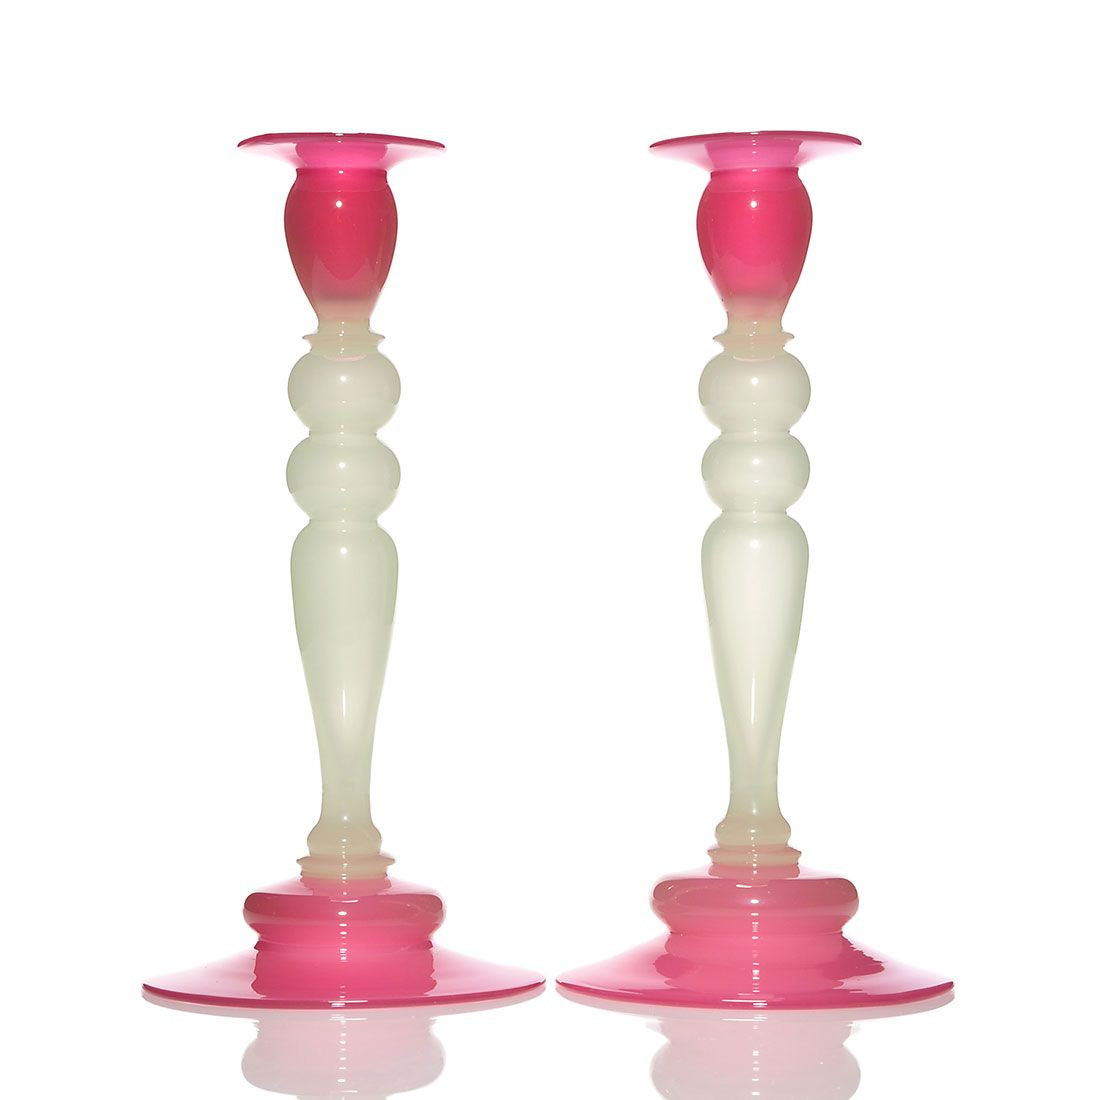 steuben crystal vase of pair steuben glass art deco candle stands shape 2956 in rosaline with regard to pair steuben glass art deco candle stands shape 2956 in rosaline and alabaster